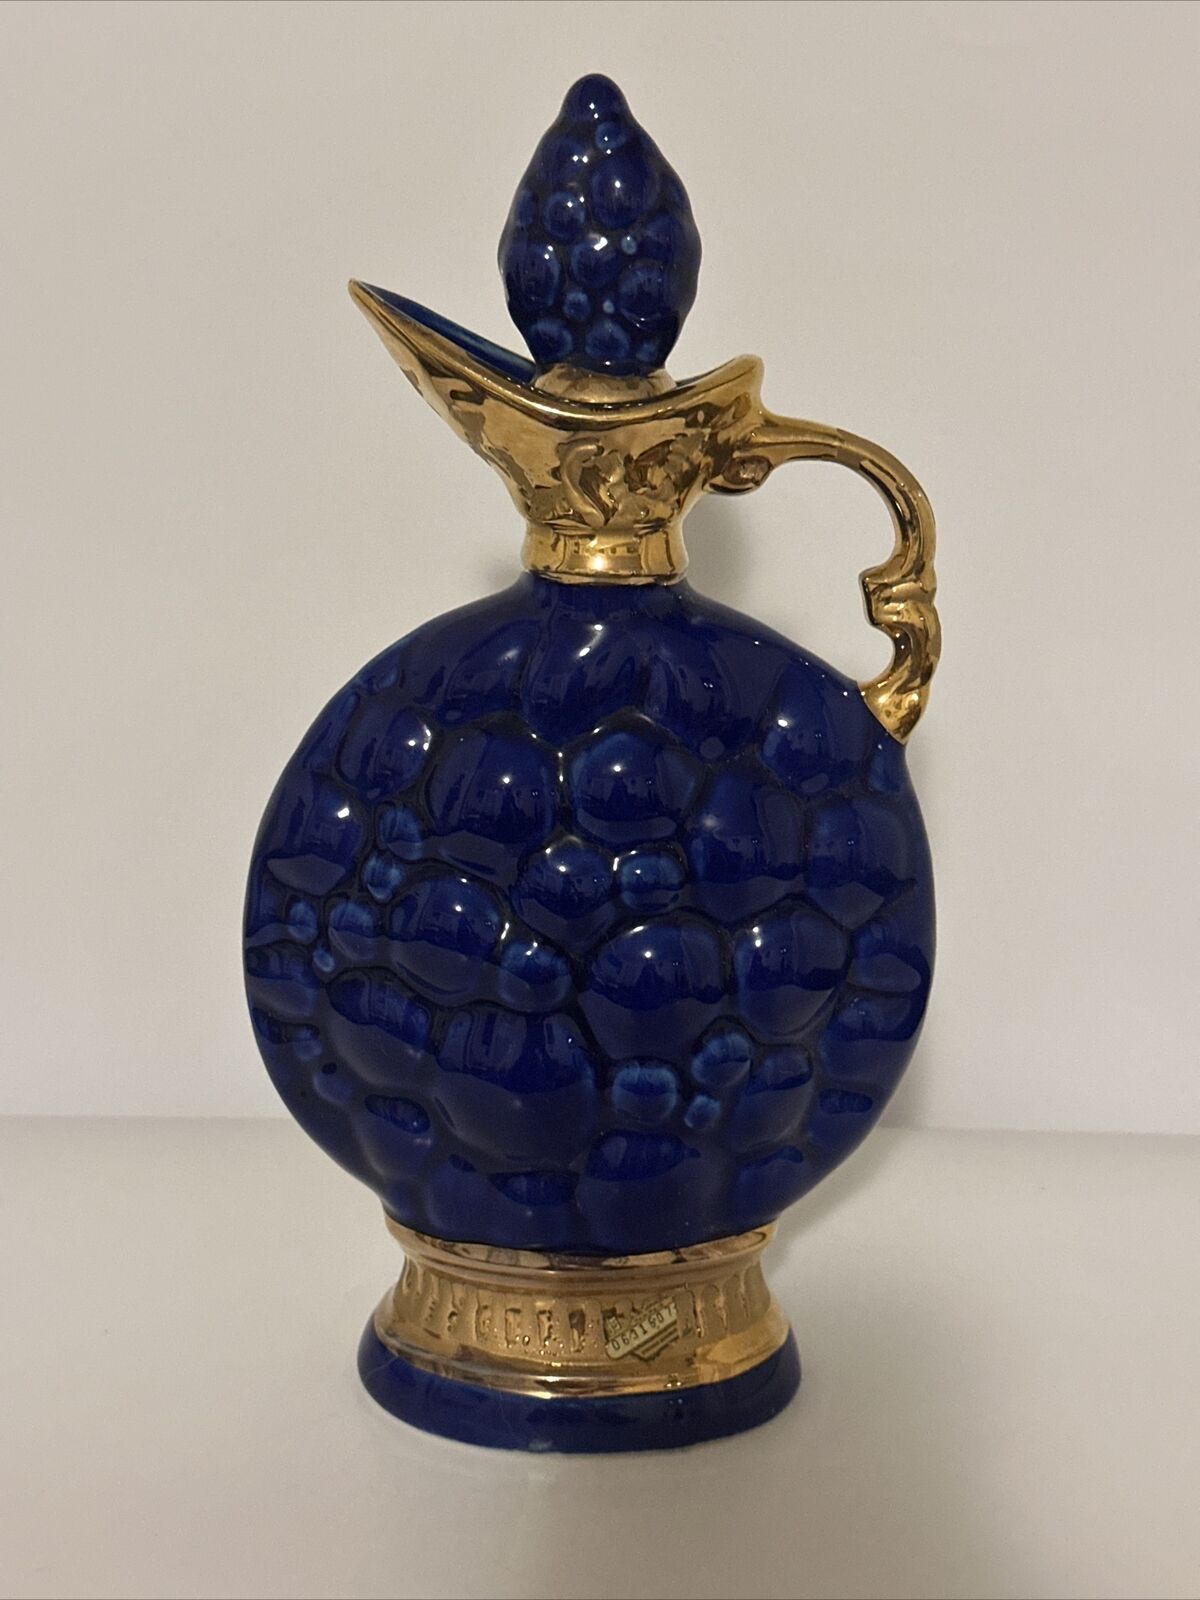 Jim Beam Grapes Decanter Bottle EMPTY Genuine Regal China Gold Trimmed 1960s